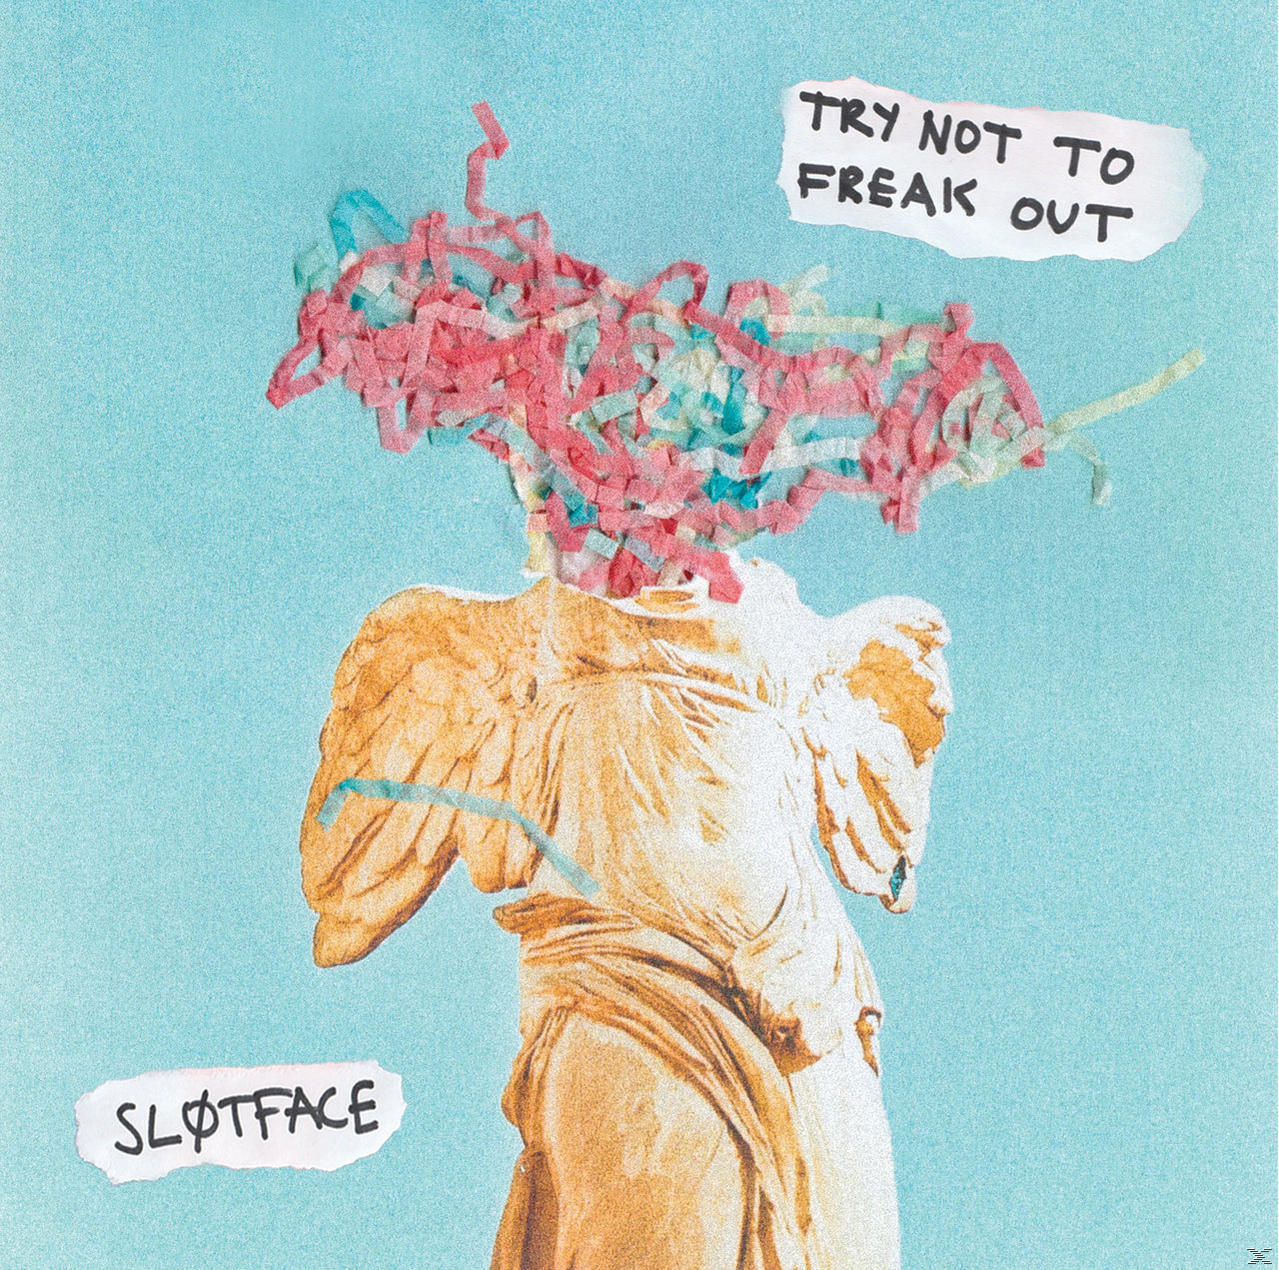 Slotface - TRY TO - (Vinyl) FREAK OUT NOT